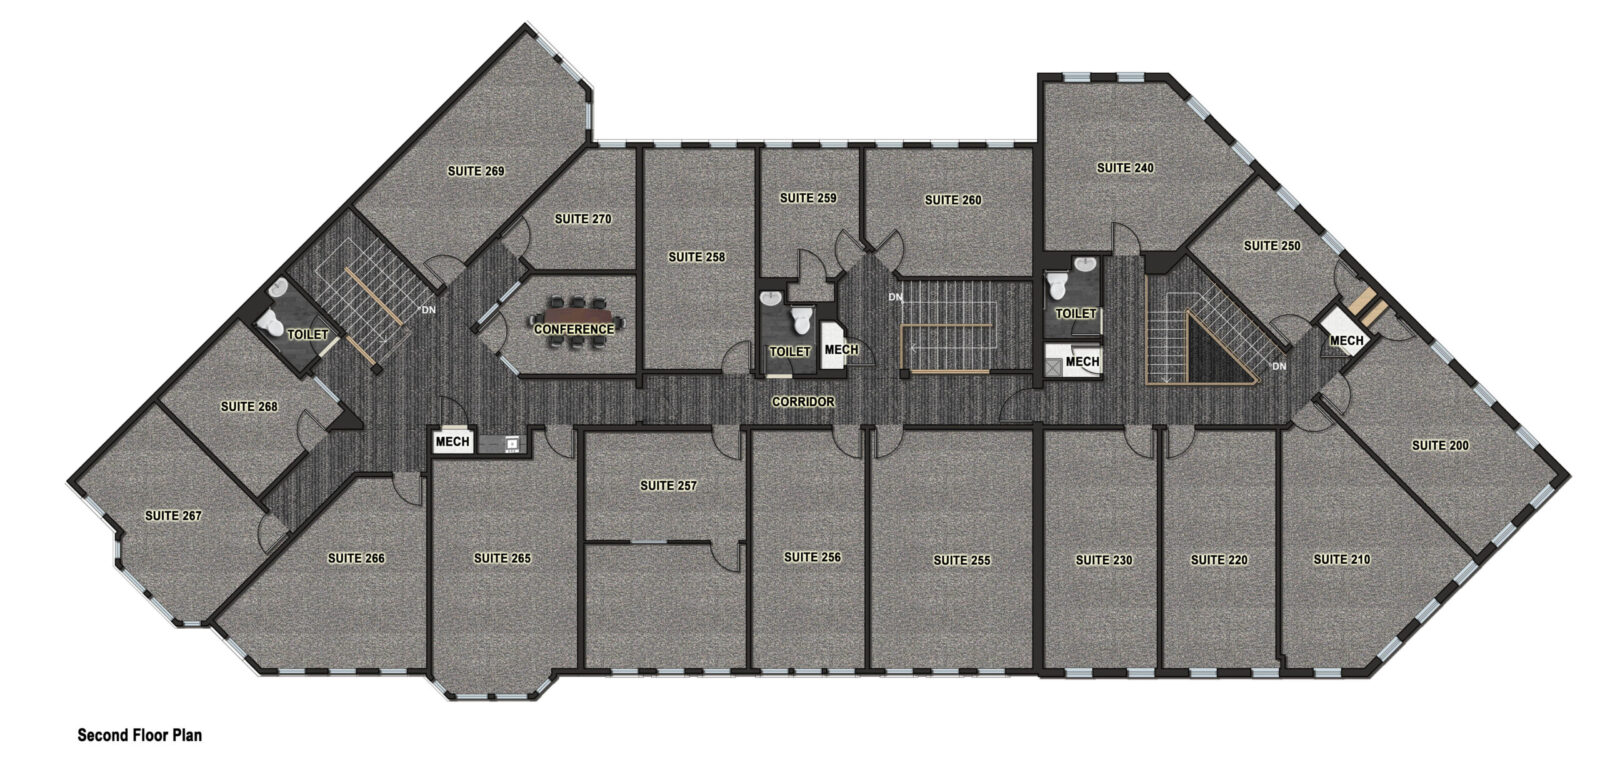 Second floor plan of several suites